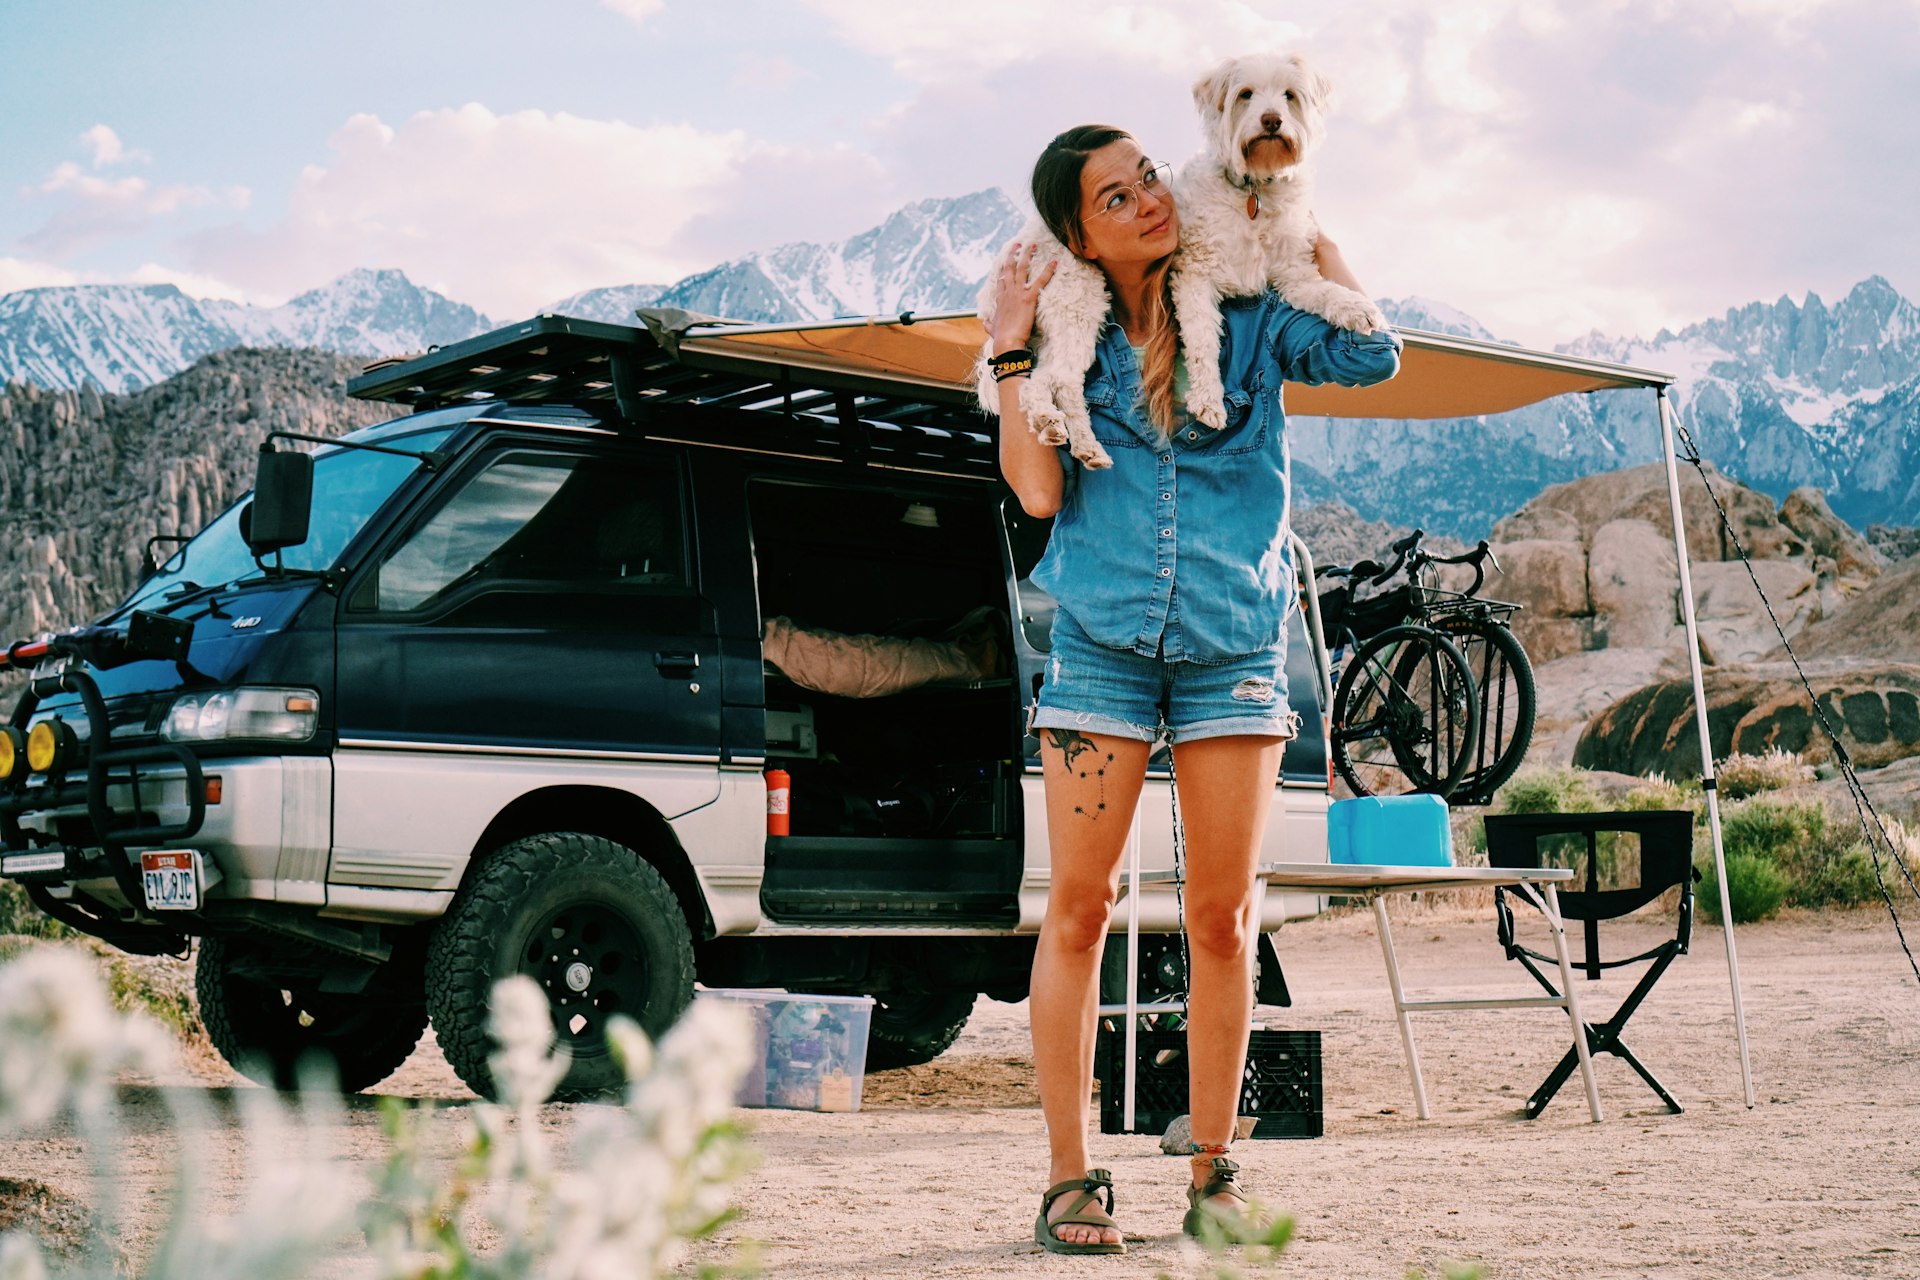 Katie Boue stands in front of her van with dog Spaghetti around her shoulders. She is wearing a cambray shirt, jean shorts, and round glasses. Between her and the van is a pop-up shade canopy and foldable camping chairs.